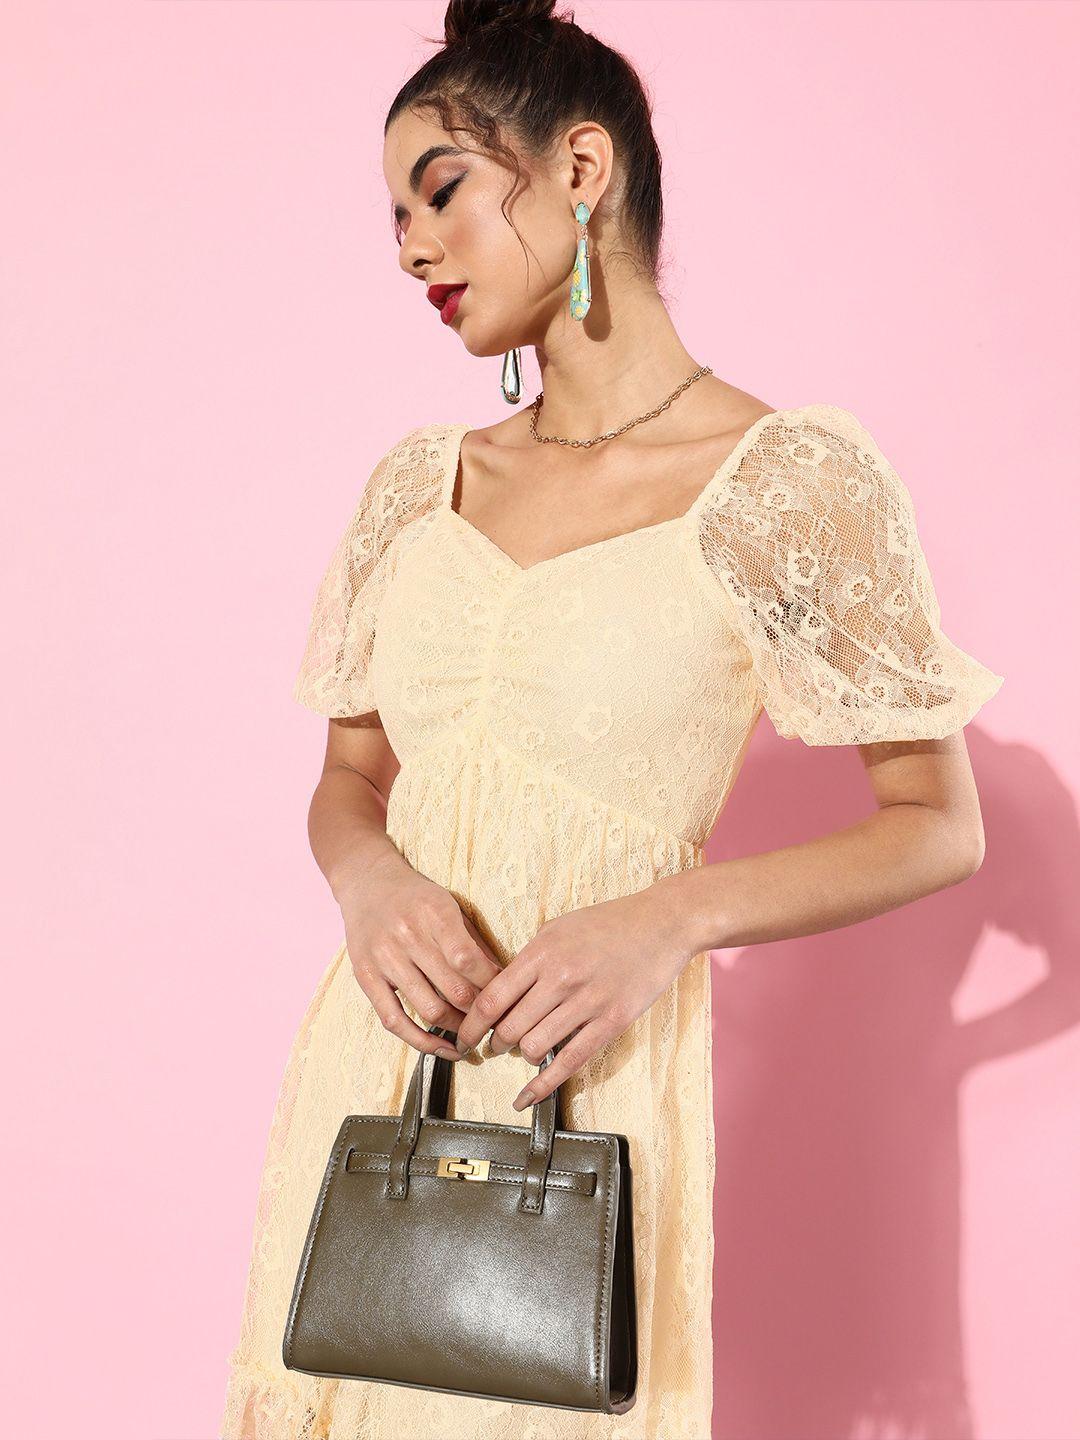 style quotient cream floral lacework and sheer dress